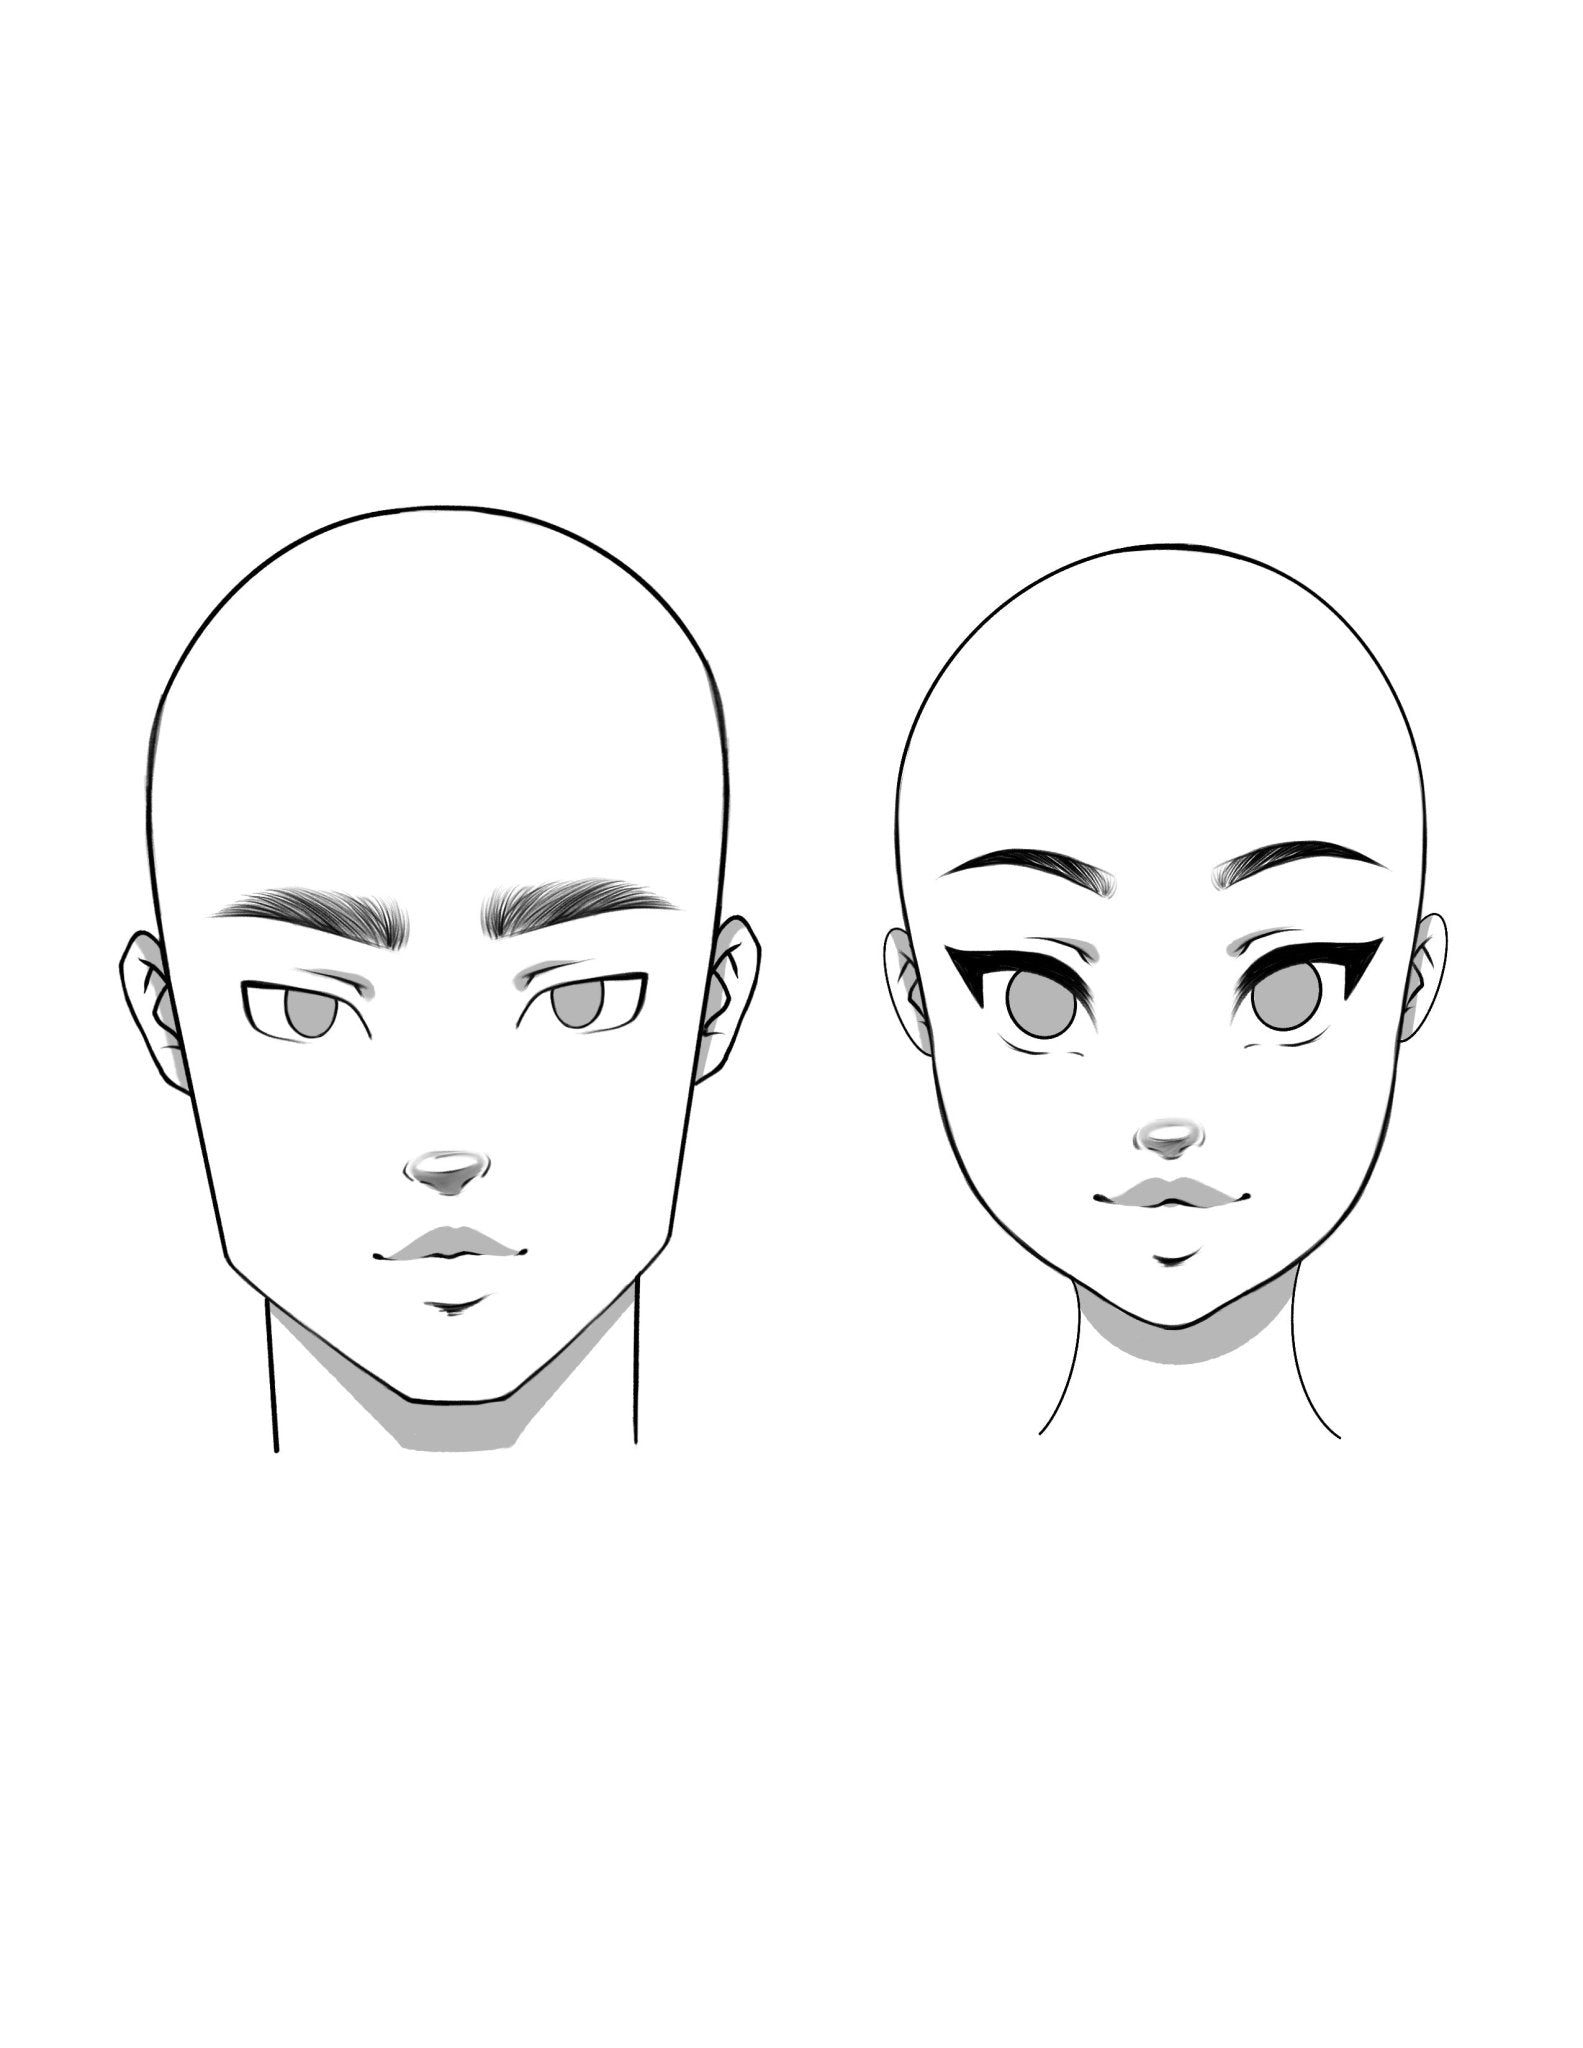 Drawing Heads from Different Angles “Tips #1” by hex_arts - Make better art  | CLIP STUDIO TIPS